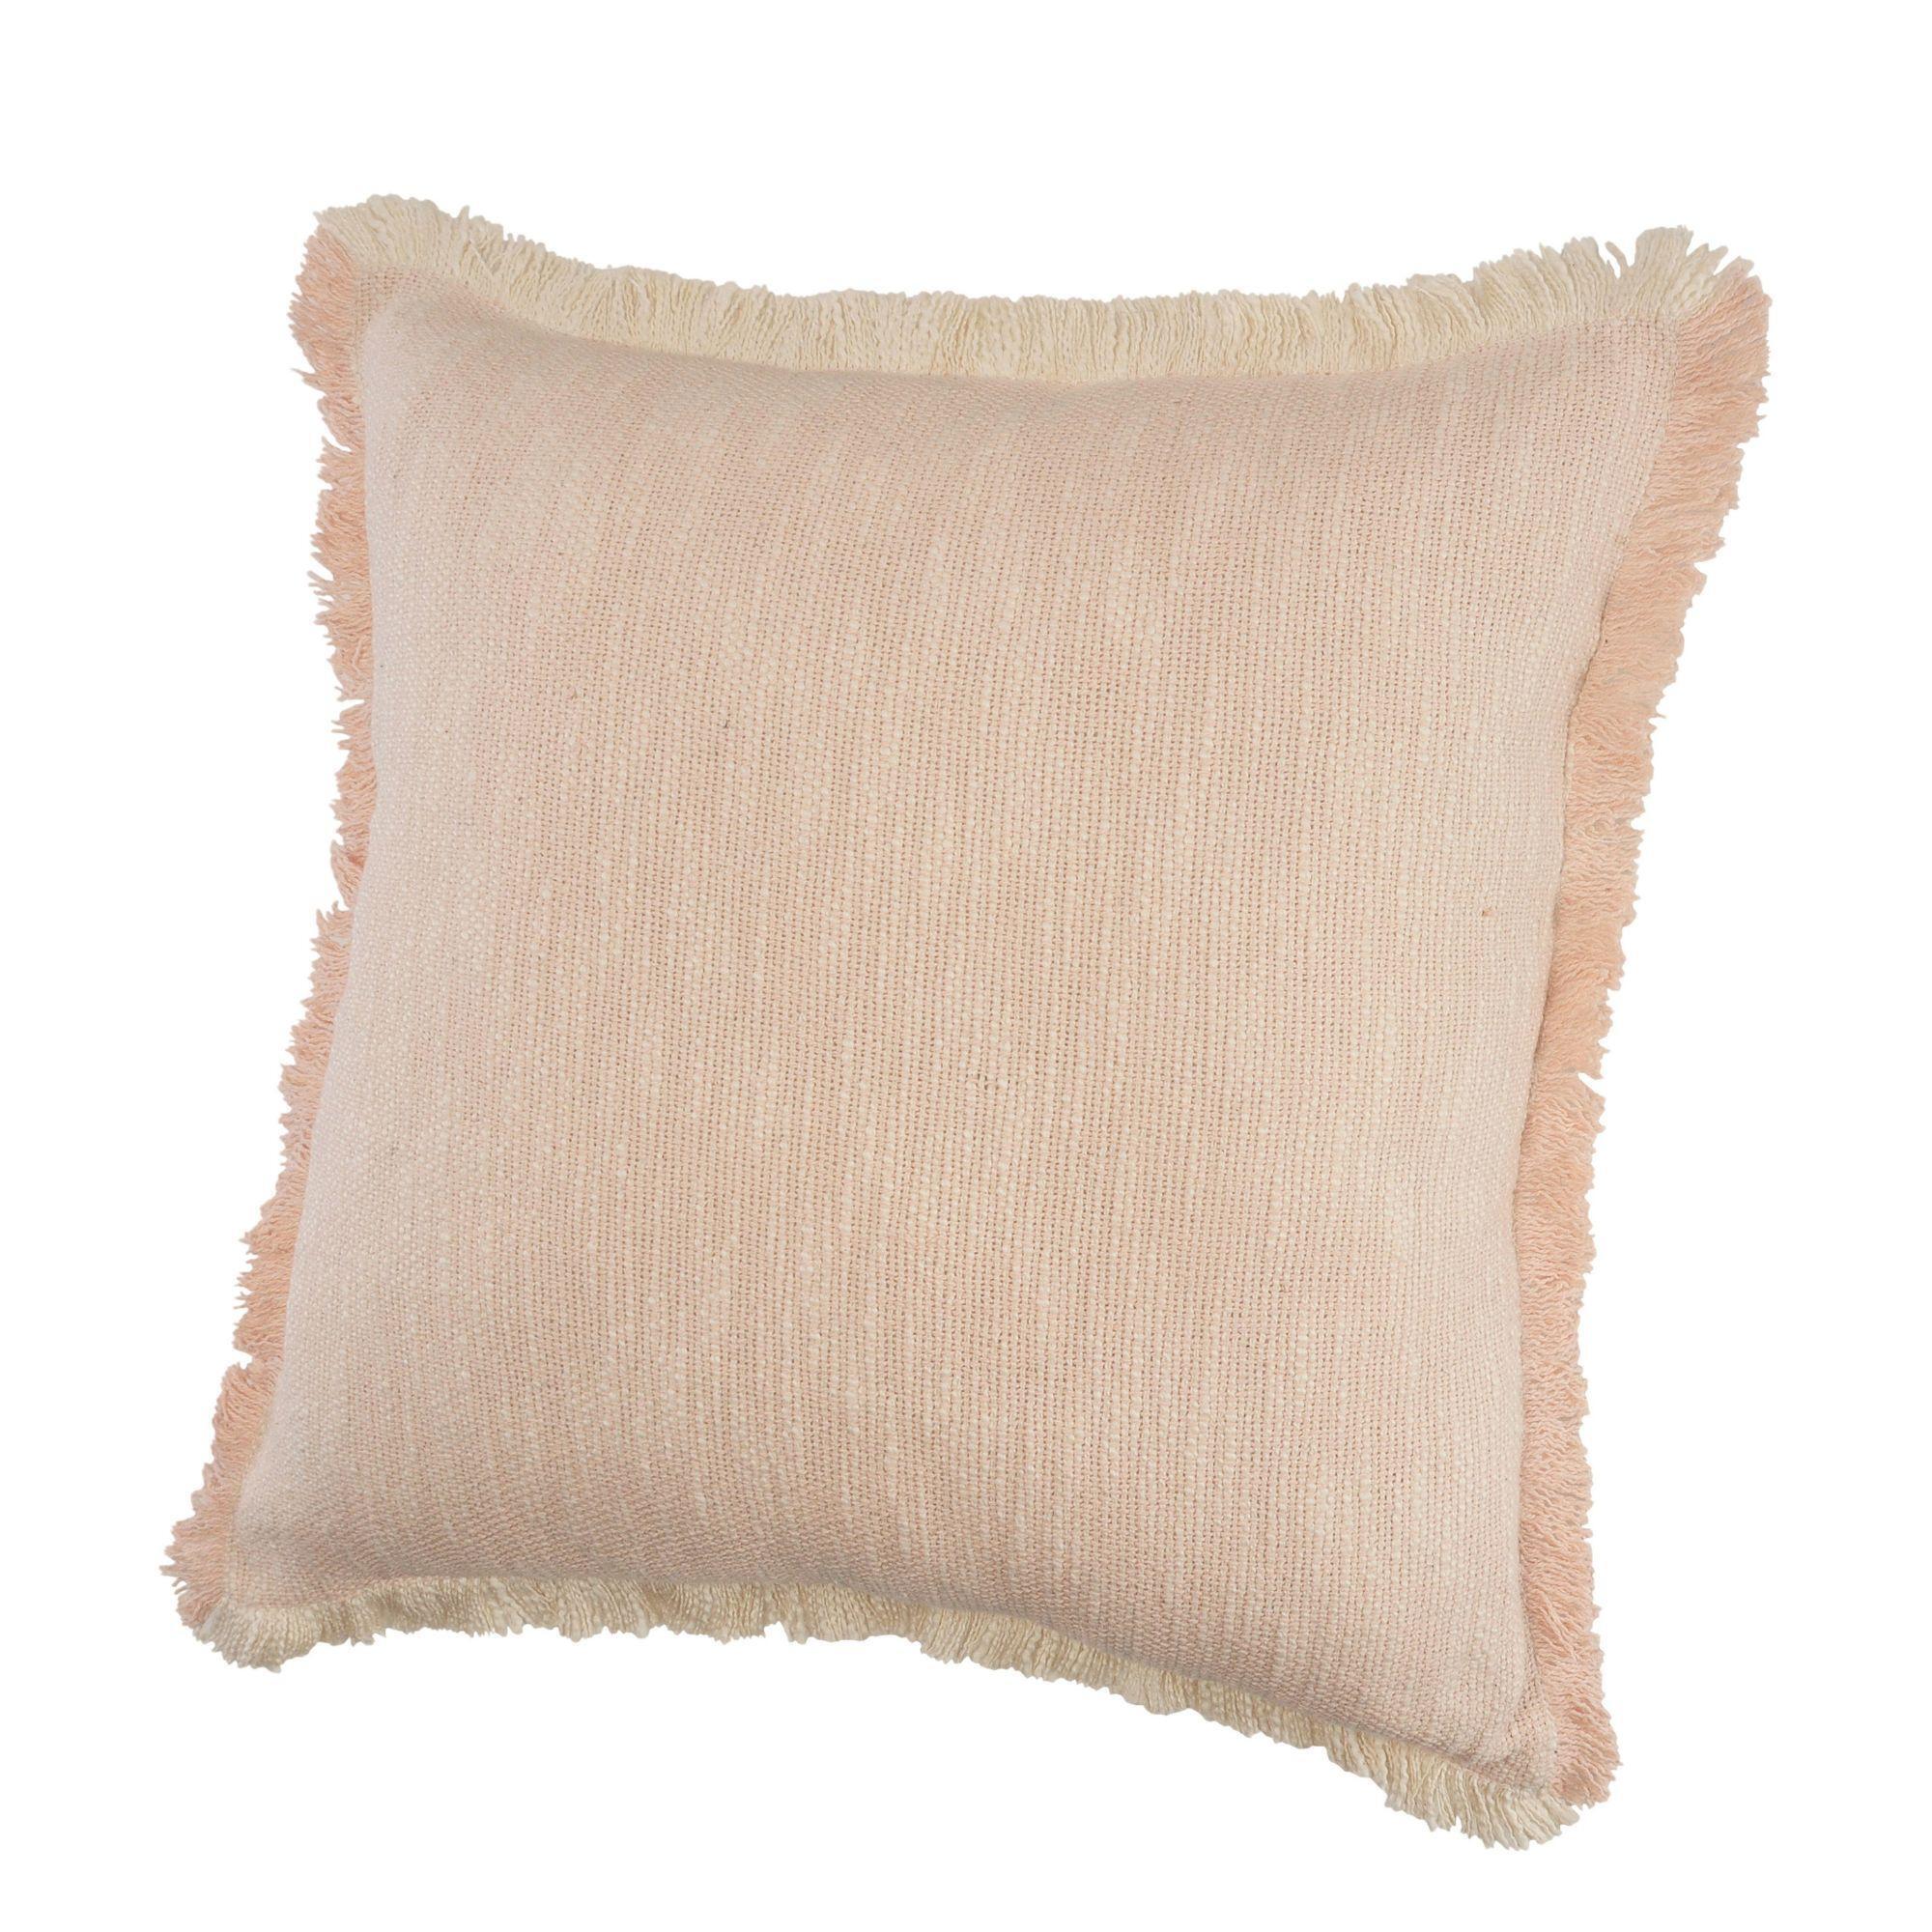 20" Pink and Cream Two Tone Hand Woven Square Throw Pillow alternate image